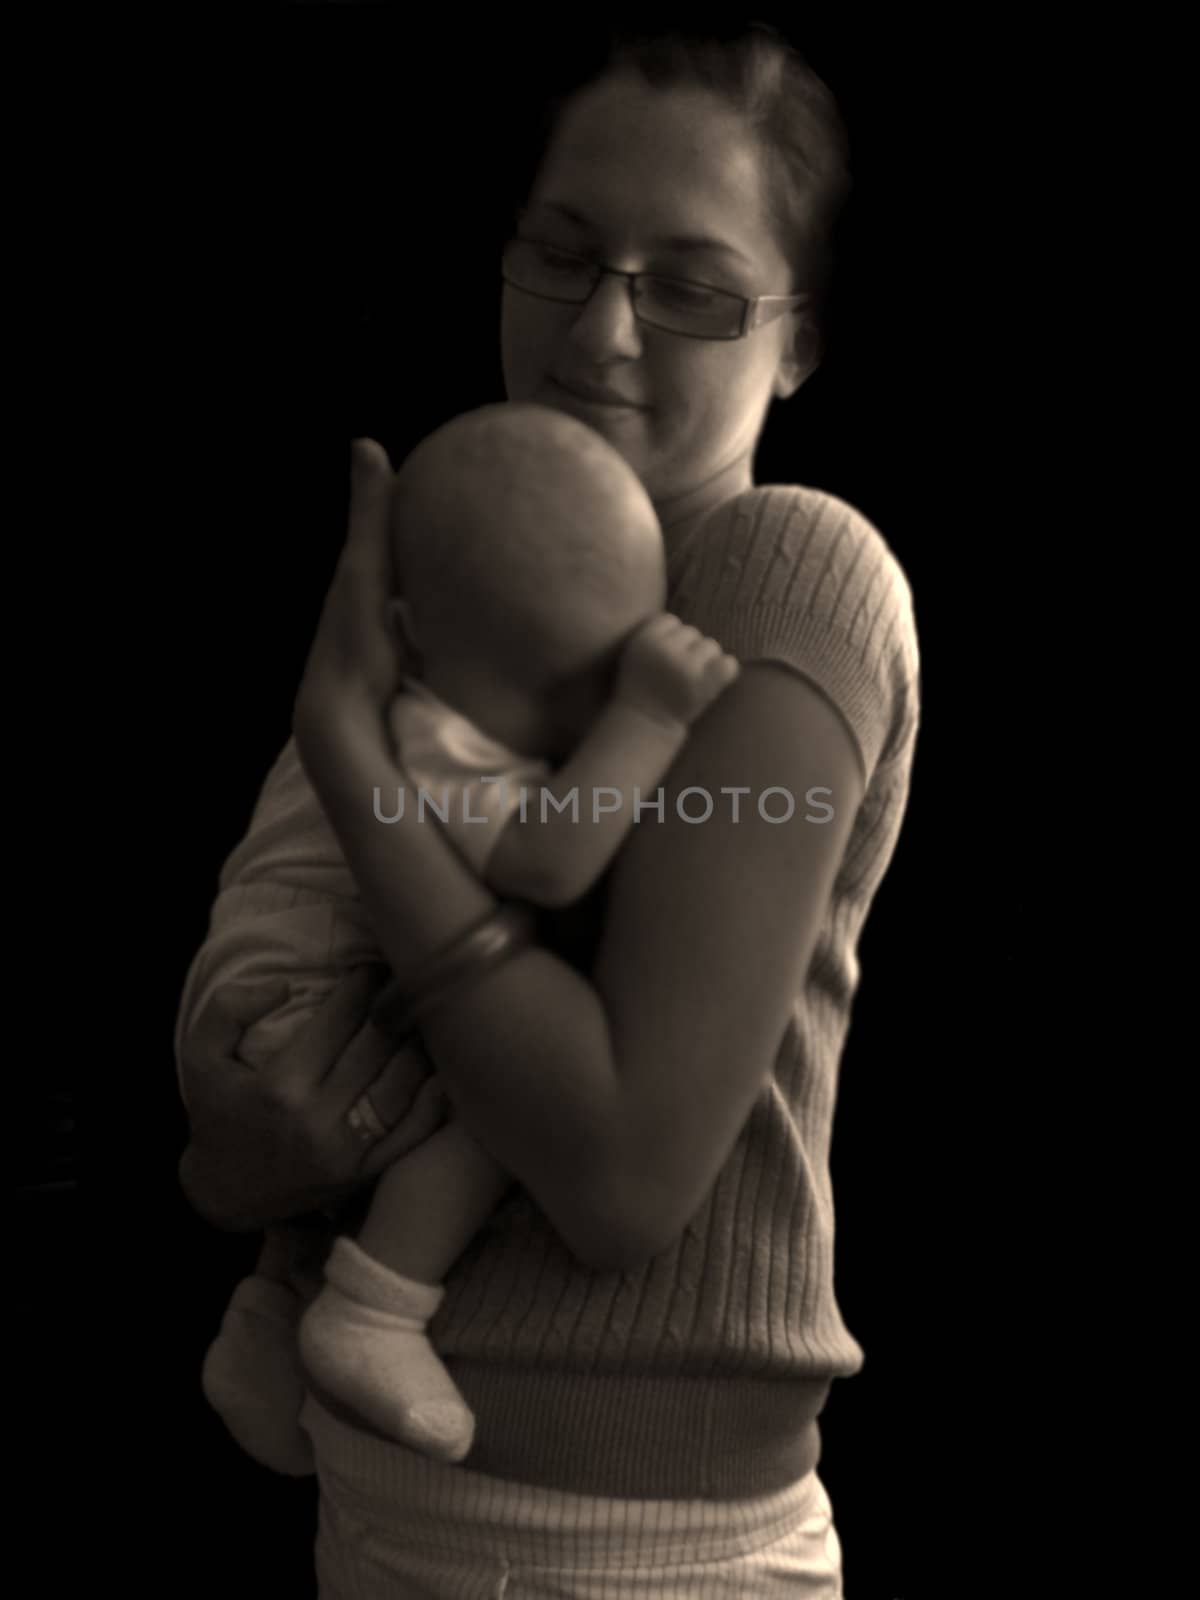 A small baby in young mother's arms